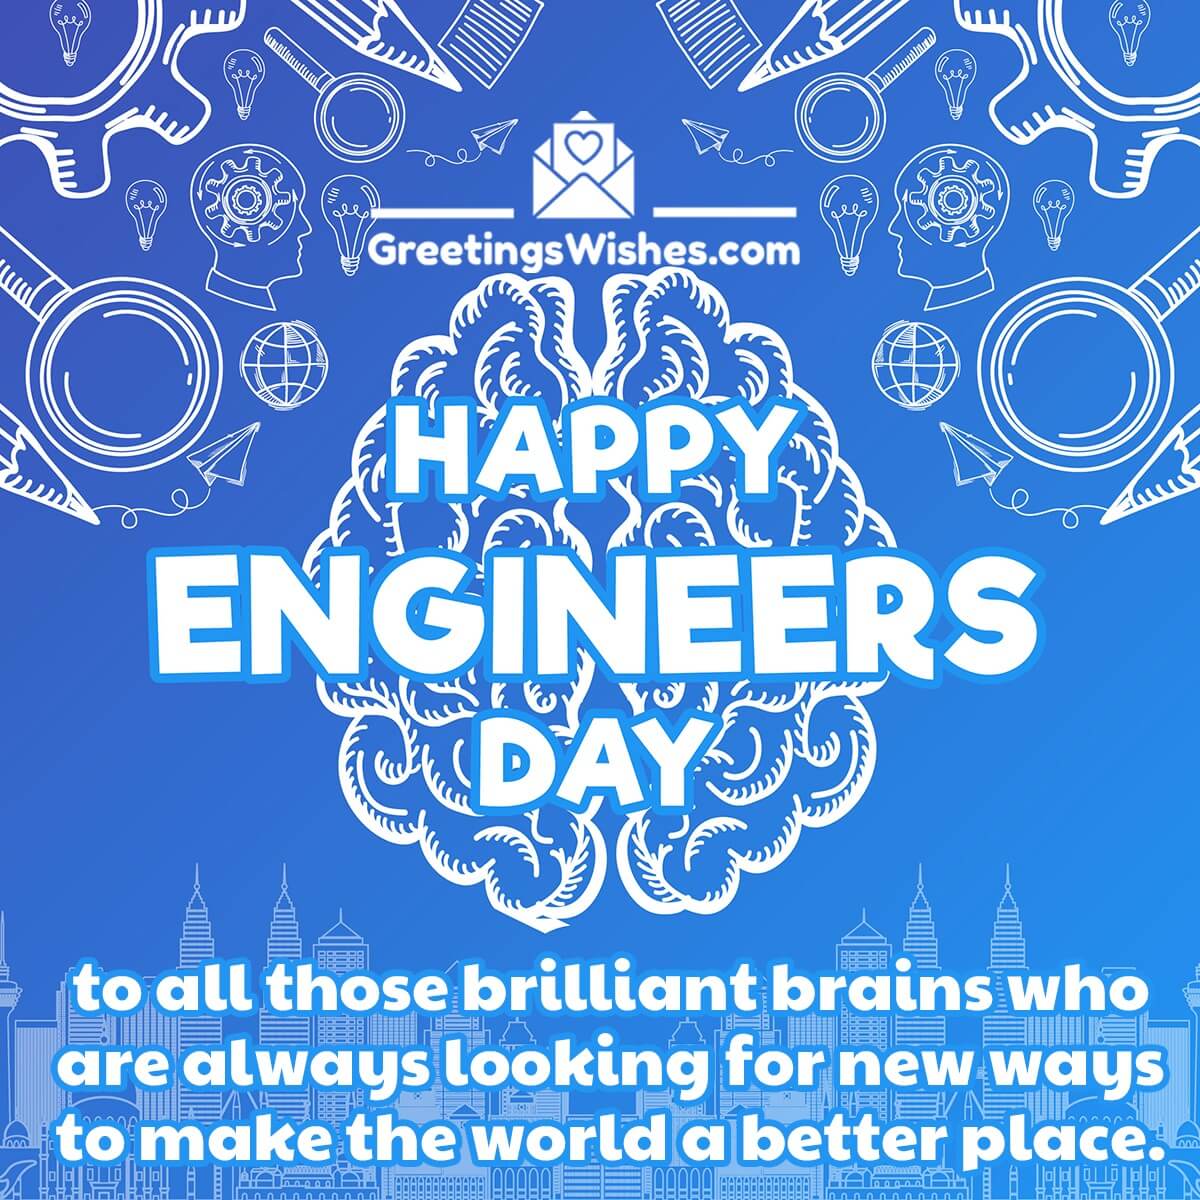 Engineers Day Wishes (15 September)